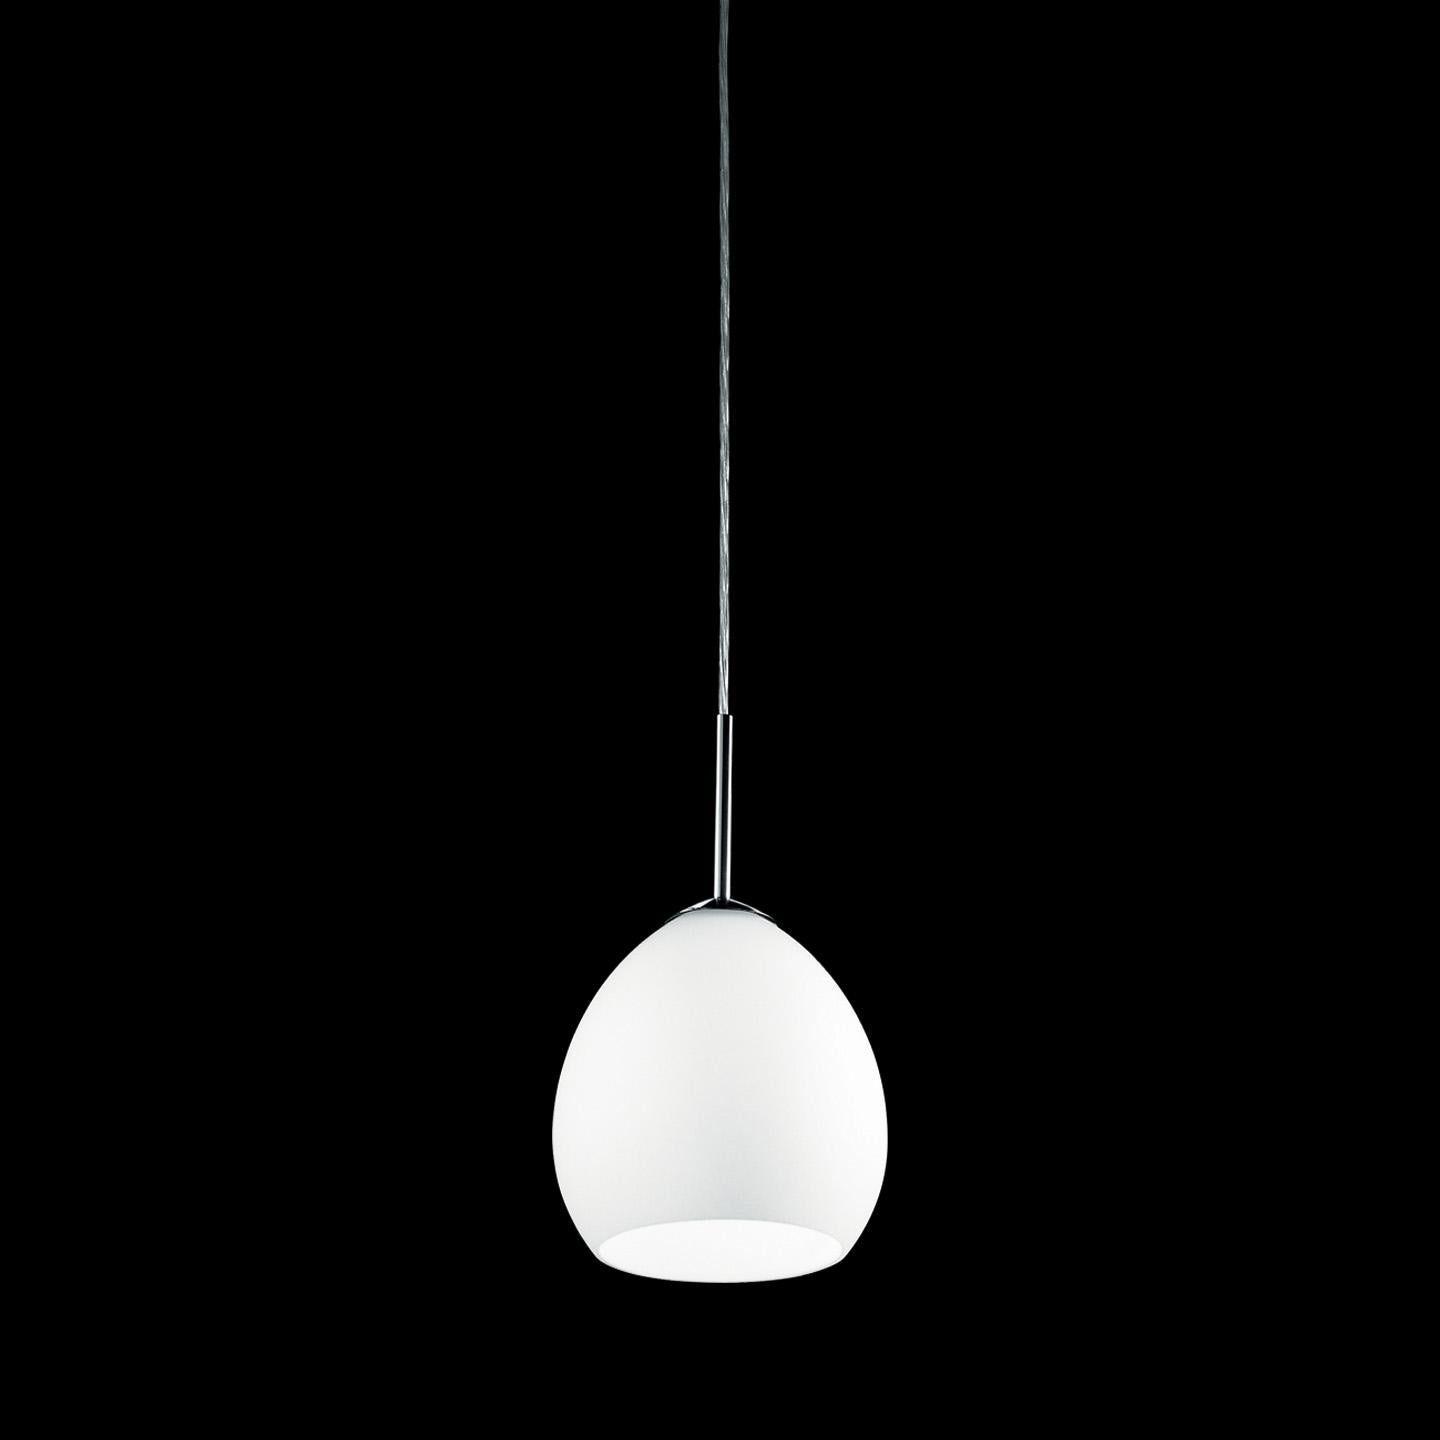 The Golf pendant is a whimsical, bestselling design from the historic Leucos design collection. Designed by Toso & Massari, the Golf collection includes a versatile array of pendants, wall and ceiling lamps. Each comes with the option of a hand